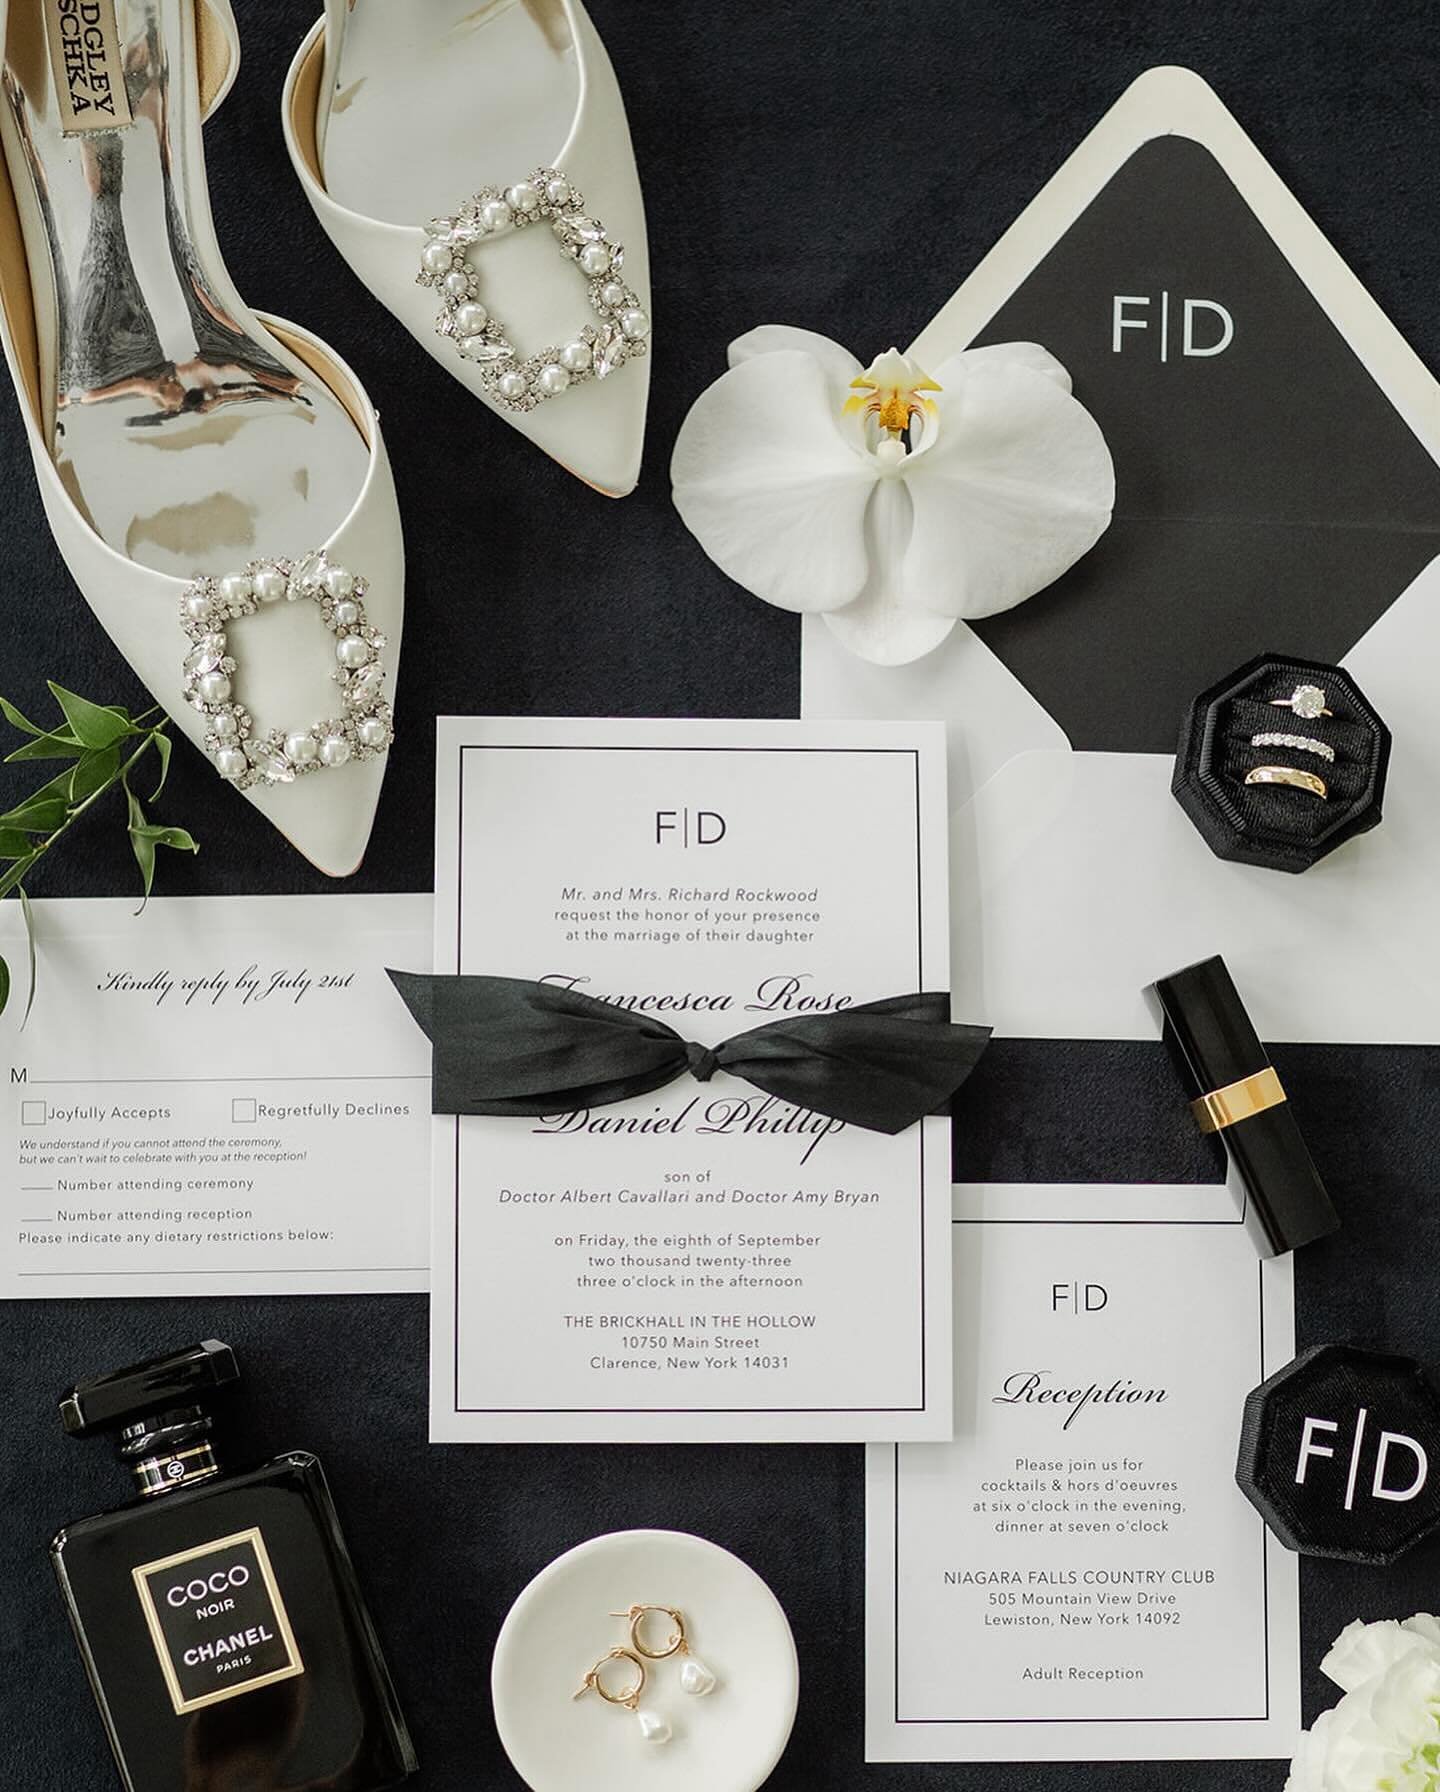 F + D went for a classic and neutral look for their invitation suite. They started with our Tessa semi-custom design and made it their own! They changed fonts and colors, and added a monogram, black silk ribbon, and an envelope liner.

Our semi-custo